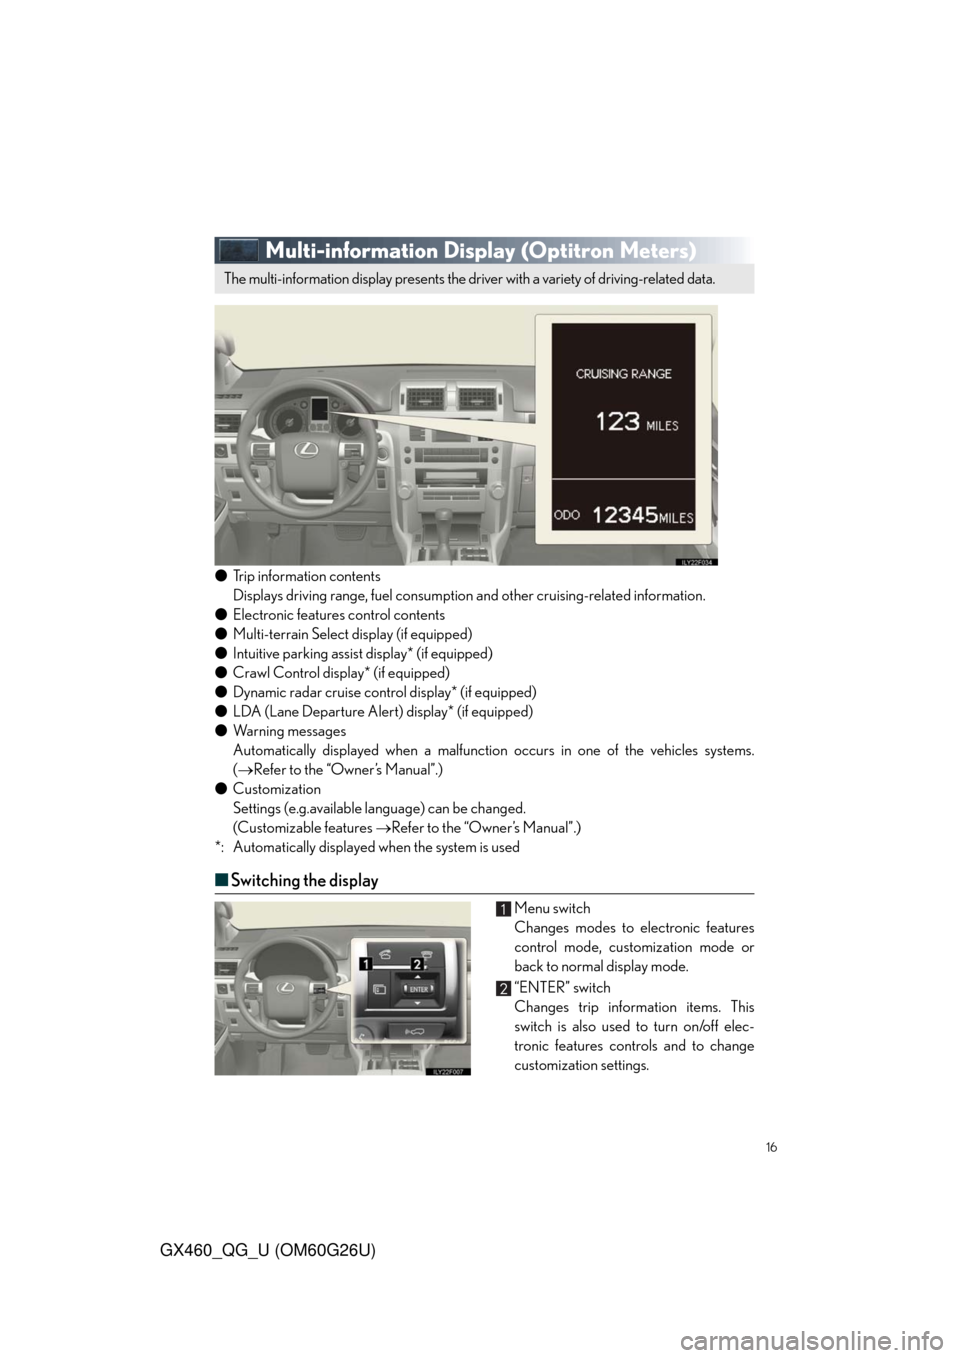 Lexus GX460 2011  Opening, Closing And Locking The Doors / LEXUS 2011 GX460 OWNERS MANUAL QUICK GUIDE (OM60G26U) 16
GX460_QG_U (OM60G26U)
Multi-information Display (Optitron Meters)
●Trip information contents
Displays driving range, fuel consumption and other cruising-related information.
●Electronic feature